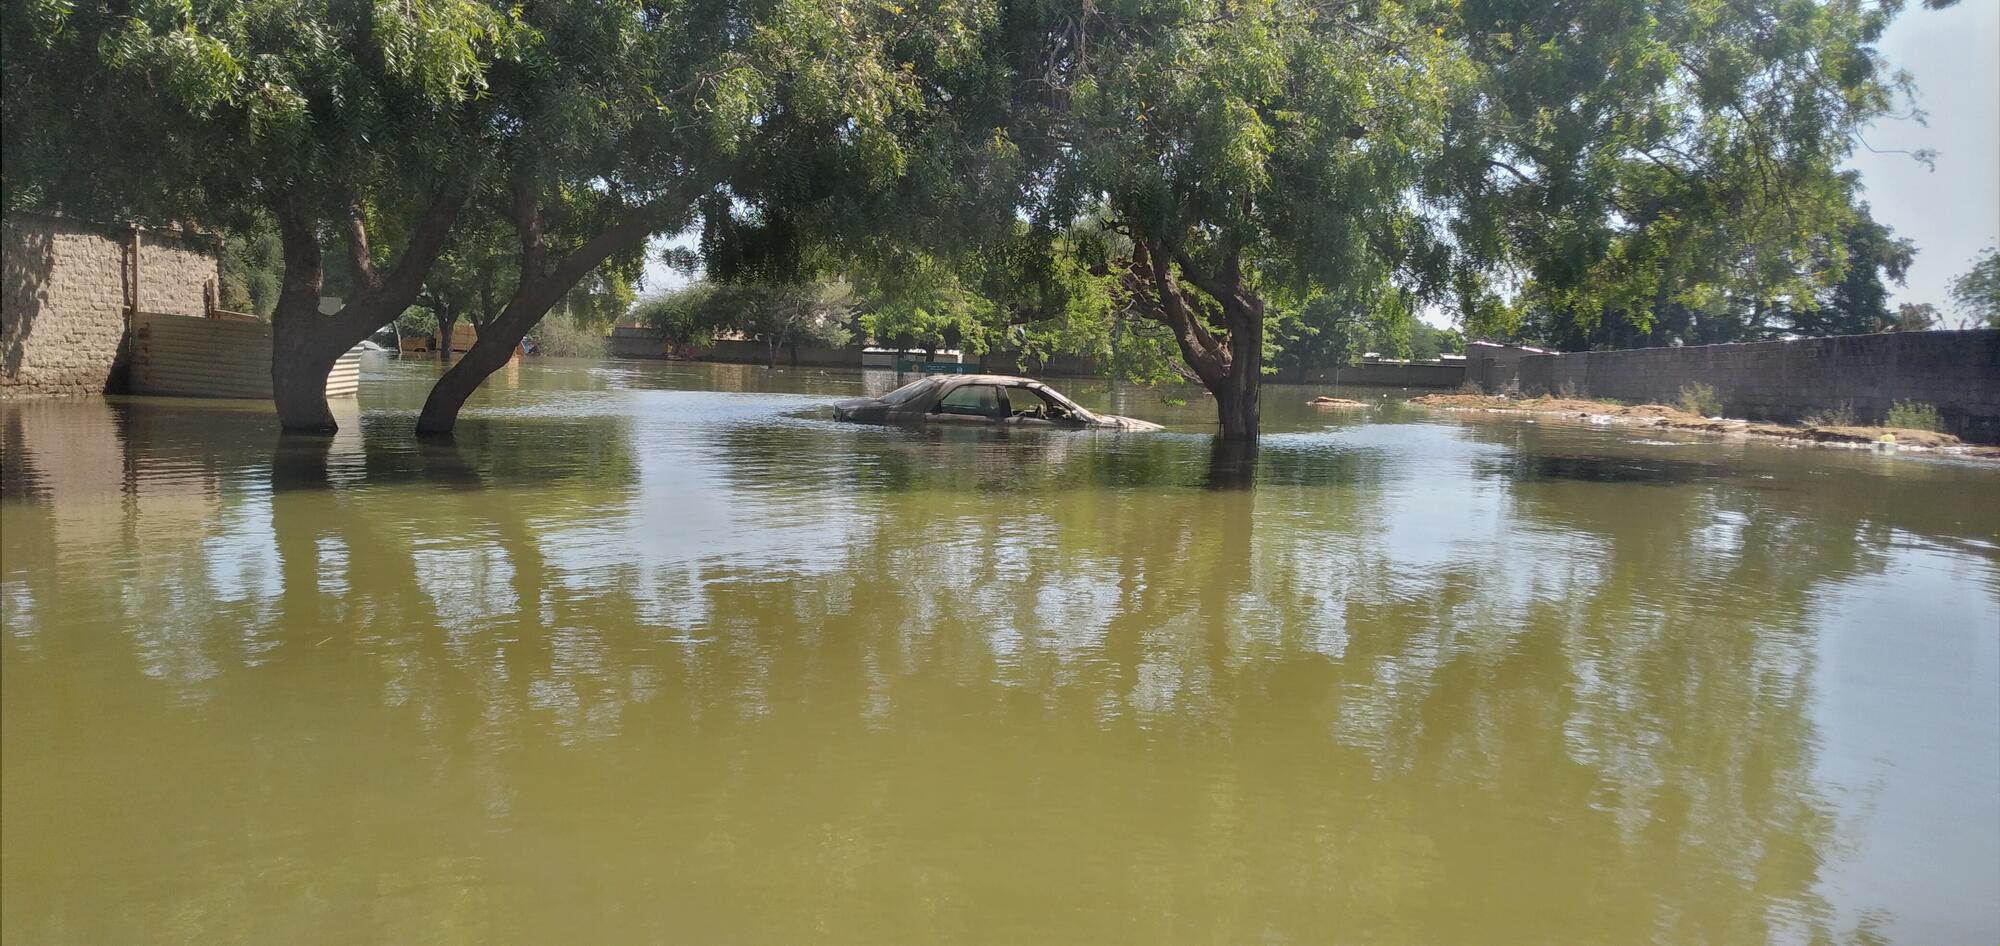 Floods in N’Djamena, Chad, deepen a humanitarian crisis with high risk of disease outbreaks | MSF